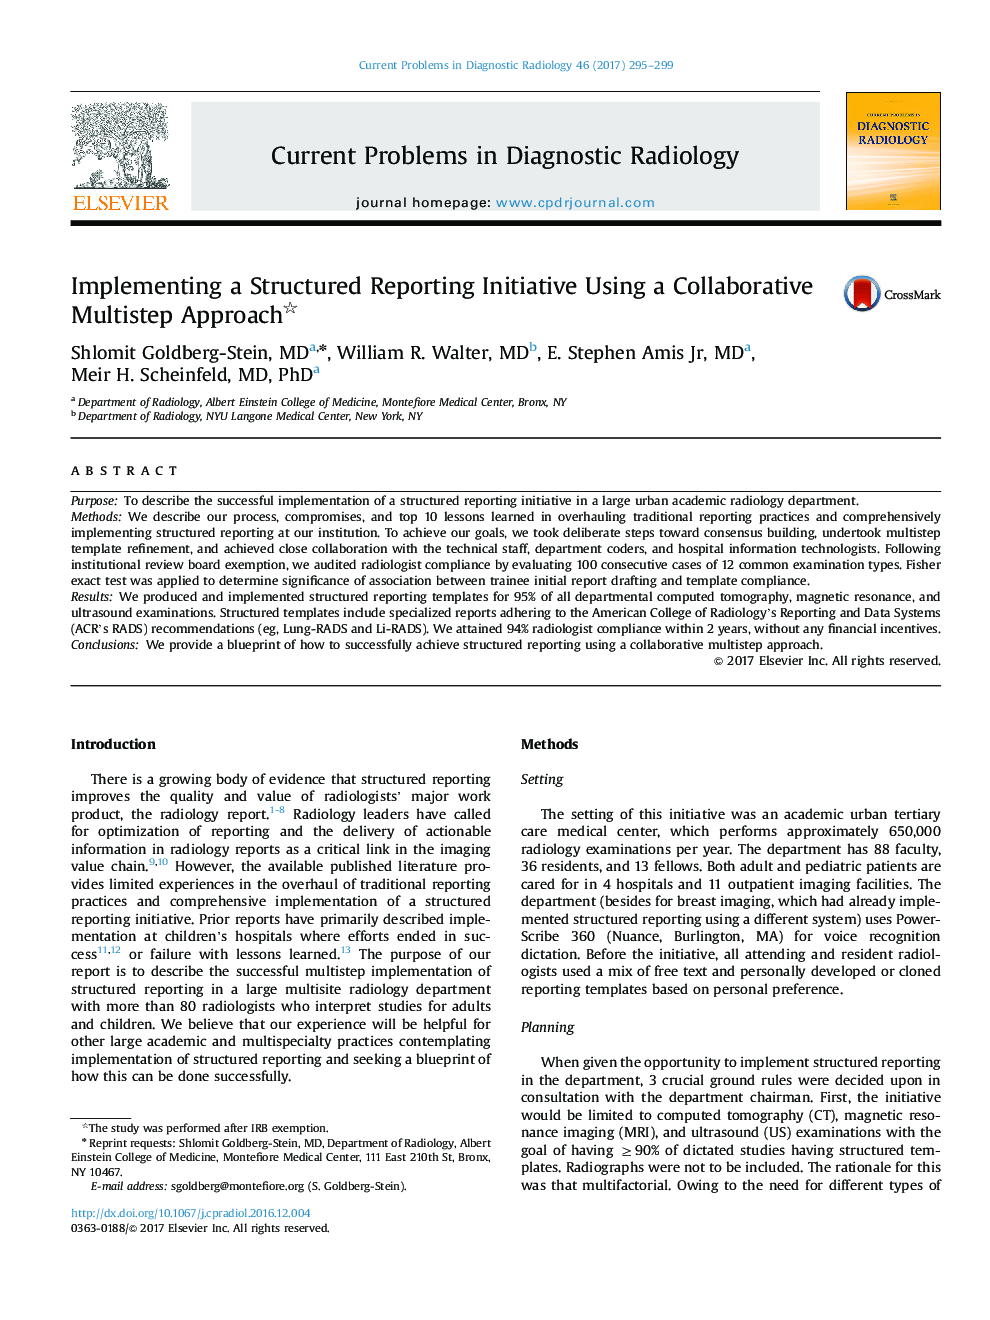 Implementing a Structured Reporting Initiative Using a Collaborative Multistep Approach